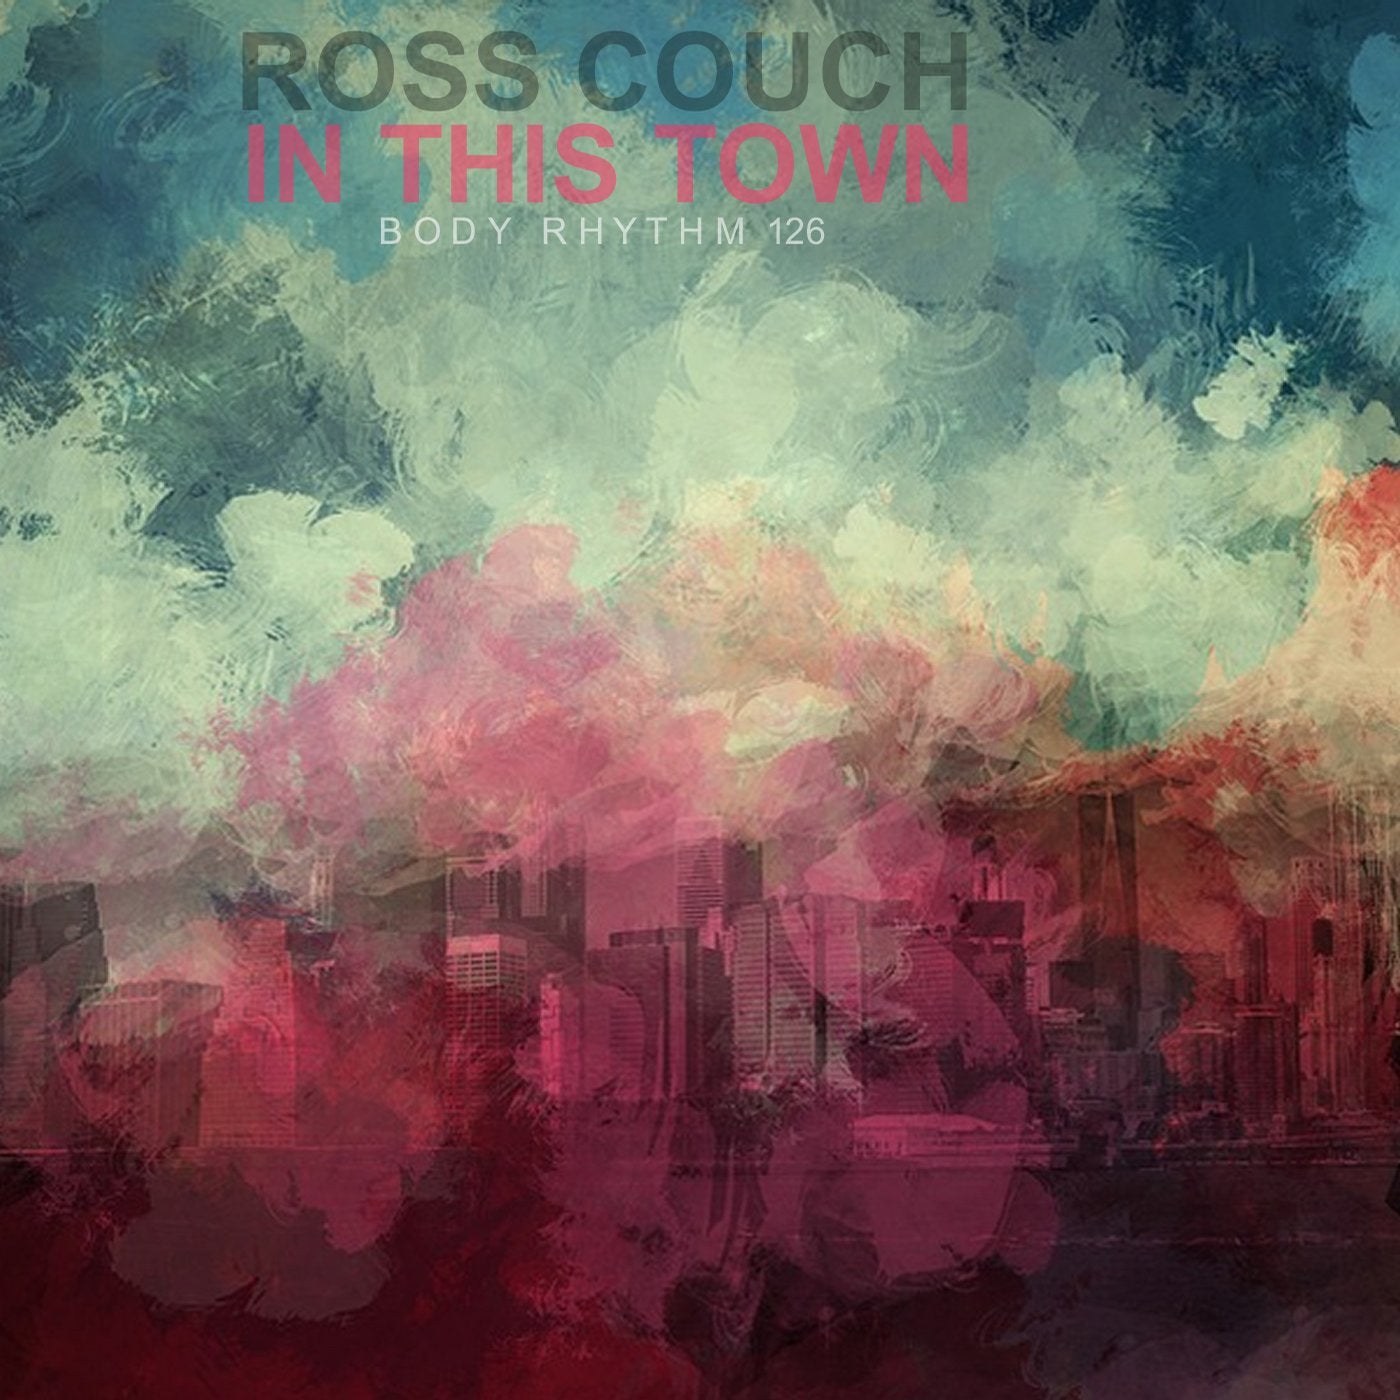 They in this town. Ross Couch. Ross Couch - going in circles. Ross Couch - 4am (Original Mix) body Rhythm records. Ross Couch is this Love Original Mix.